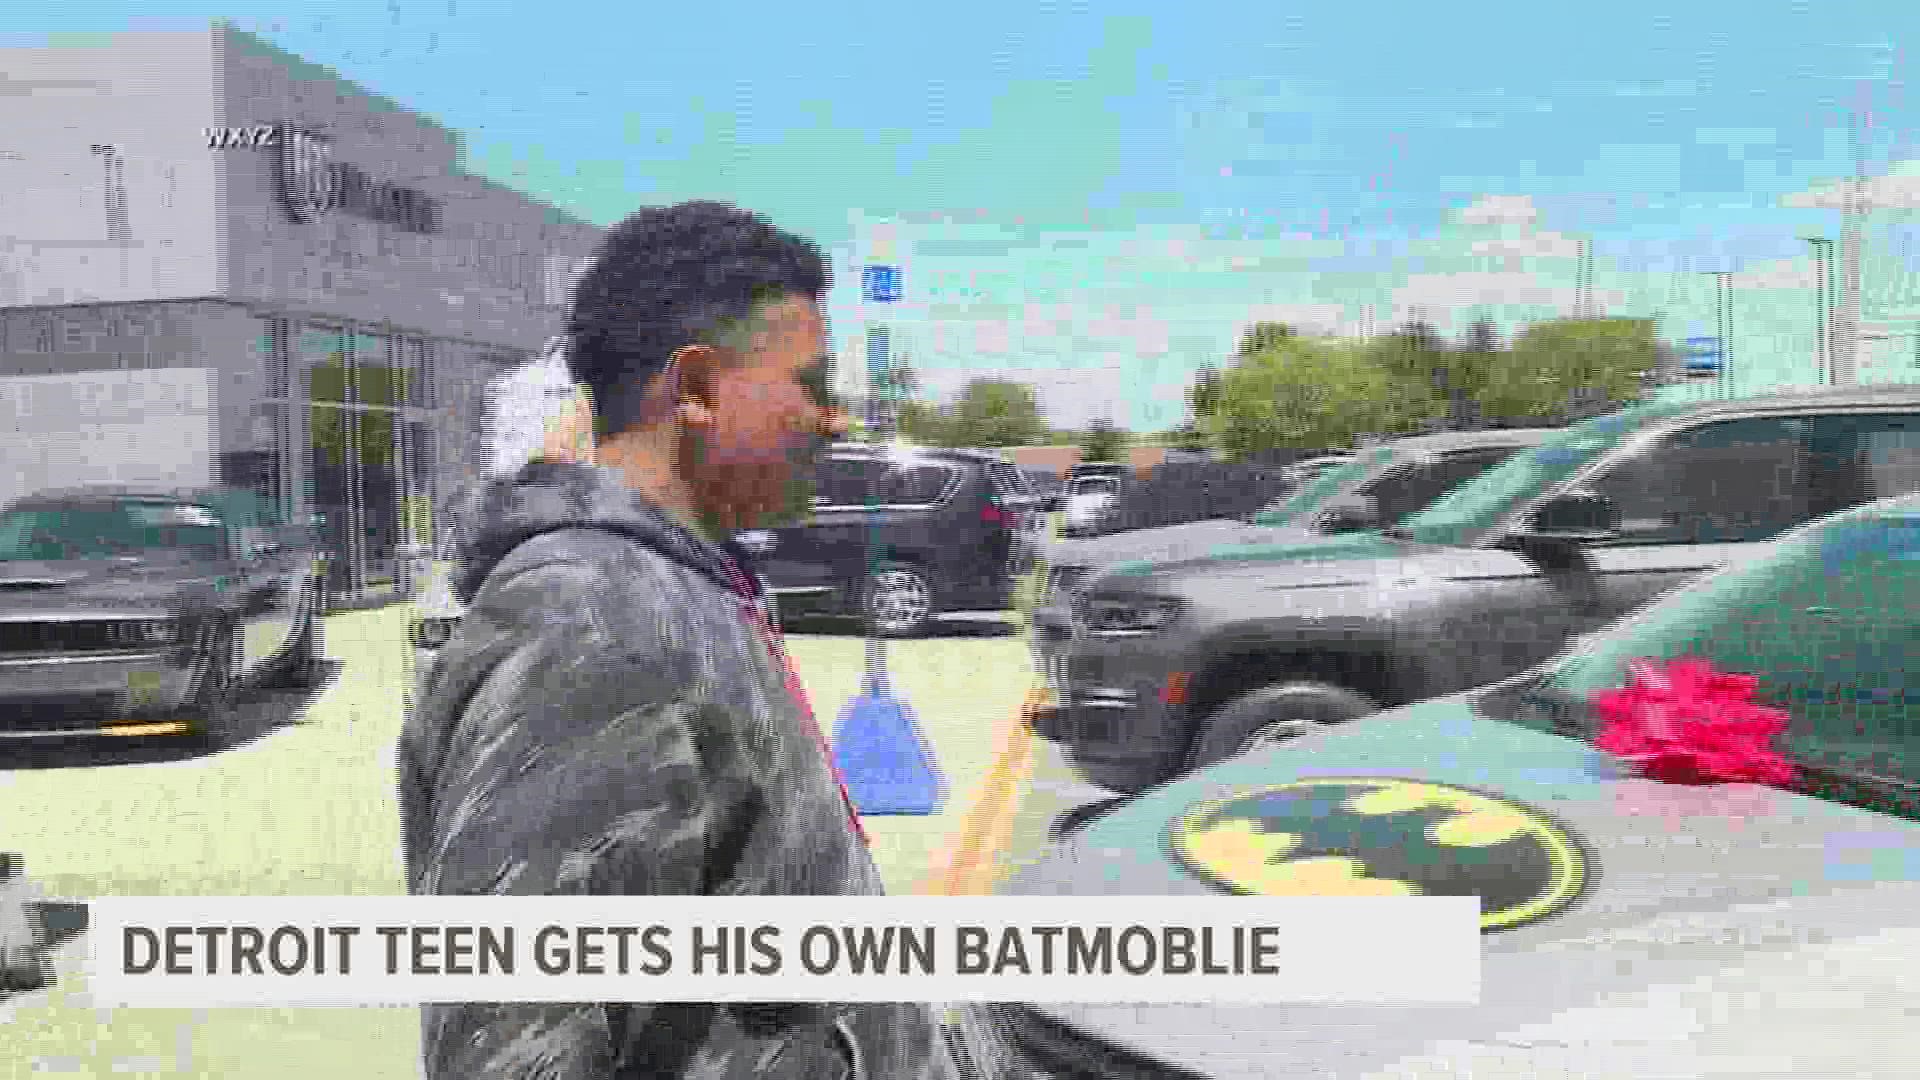 Officer Loren Courts wanted to give his son, Darian, his own Batmobile, before he was killed in a shooting last month. Members of his community made the dream real.